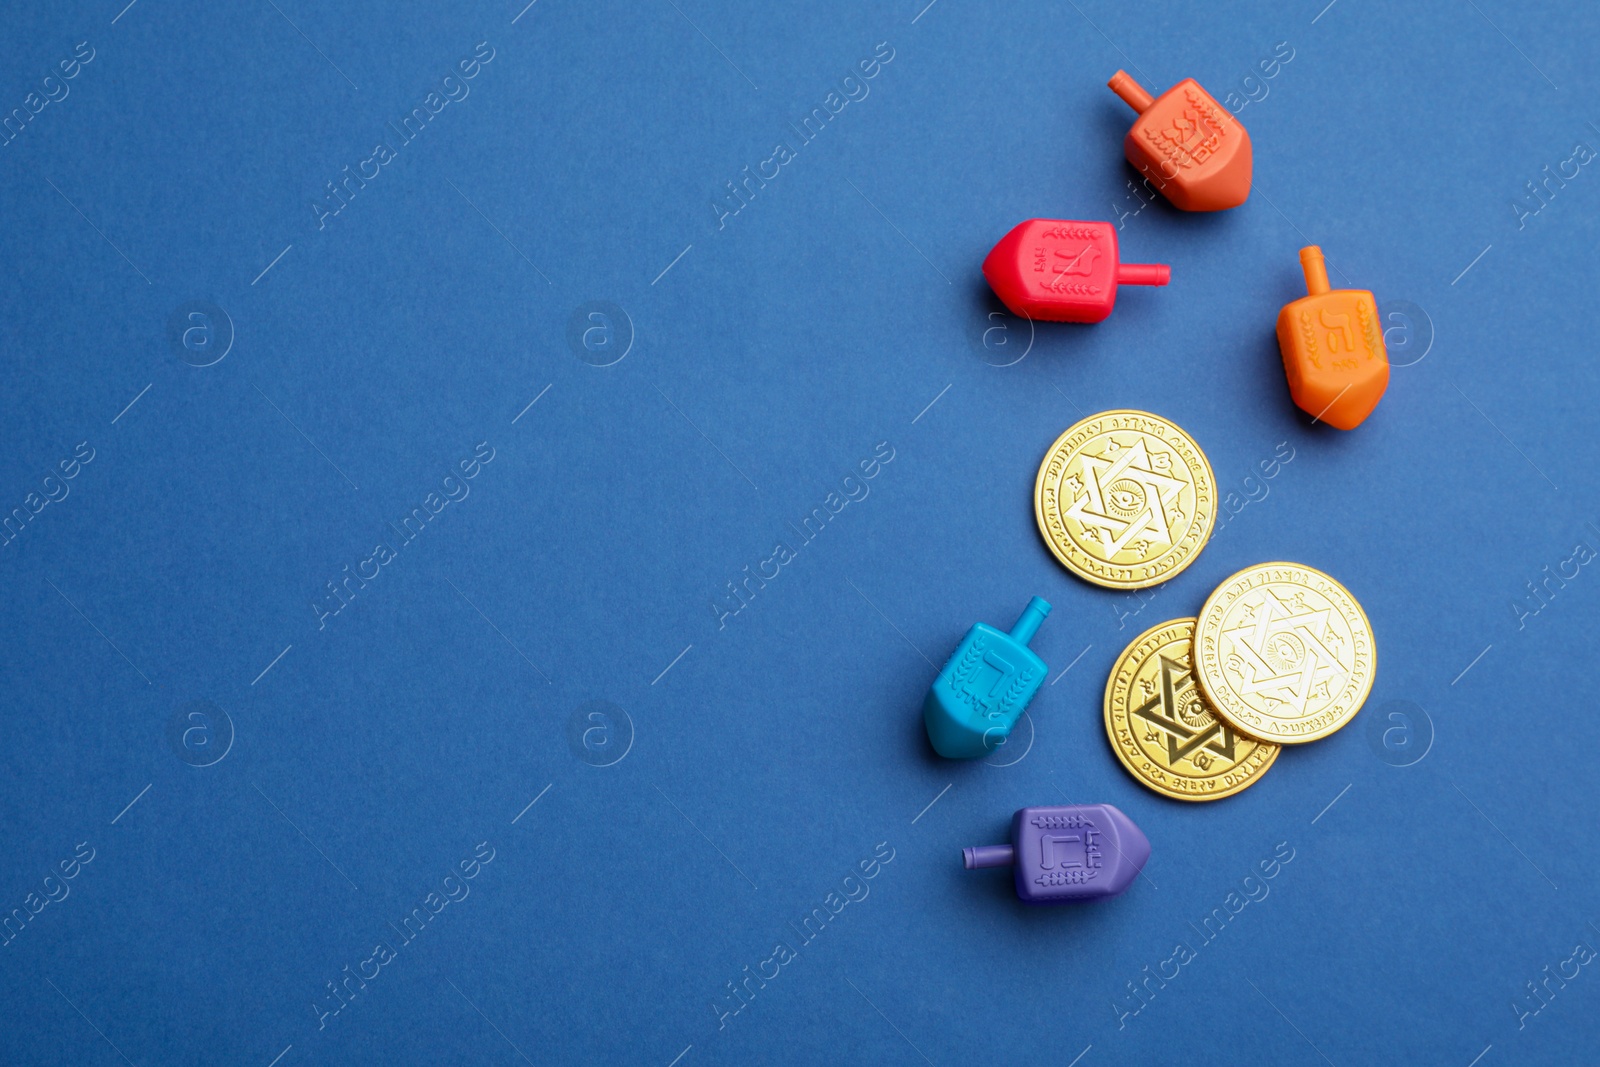 Photo of Dreidels with Jewish letters and coins on blue background, flat lay with space for text. Traditional Hanukkah game